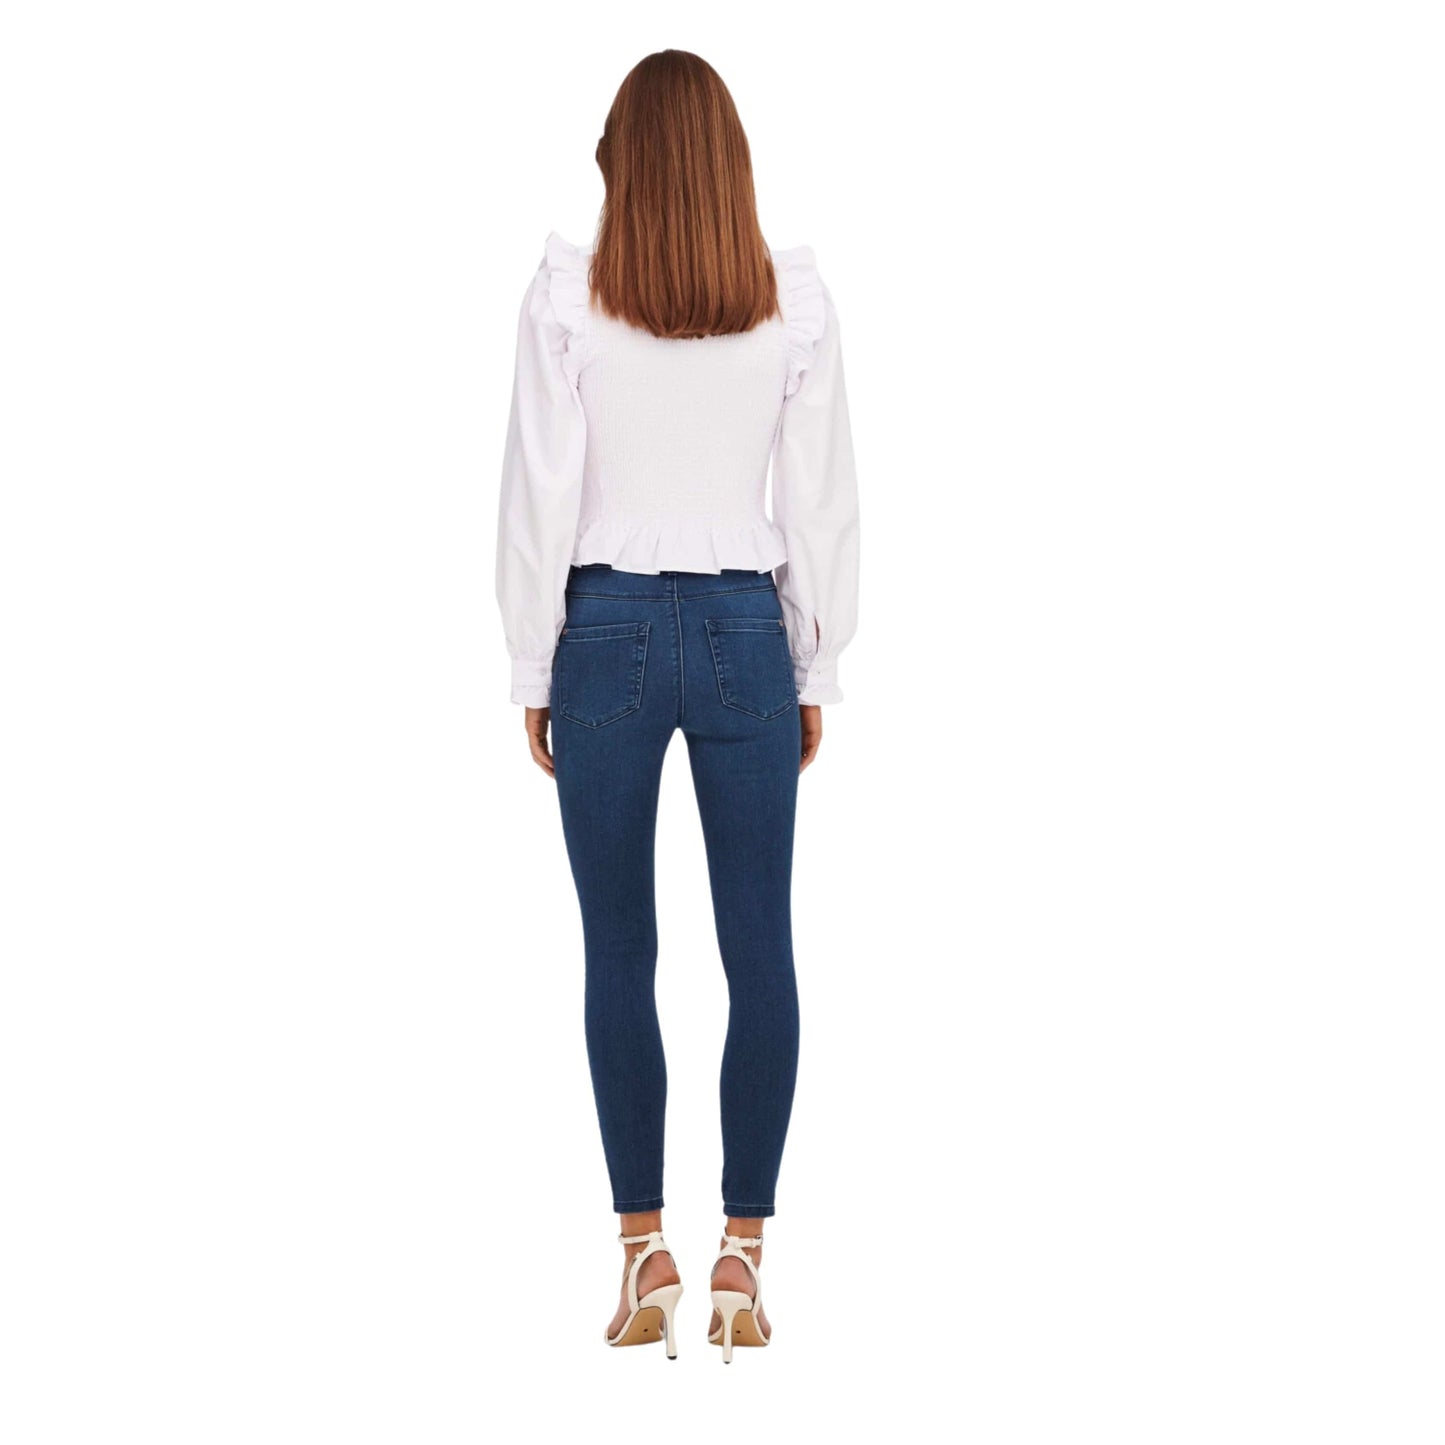 ONLY Womens Bottoms S / Navy ONLY - Royal High Waisted Skinny Fit Jeans